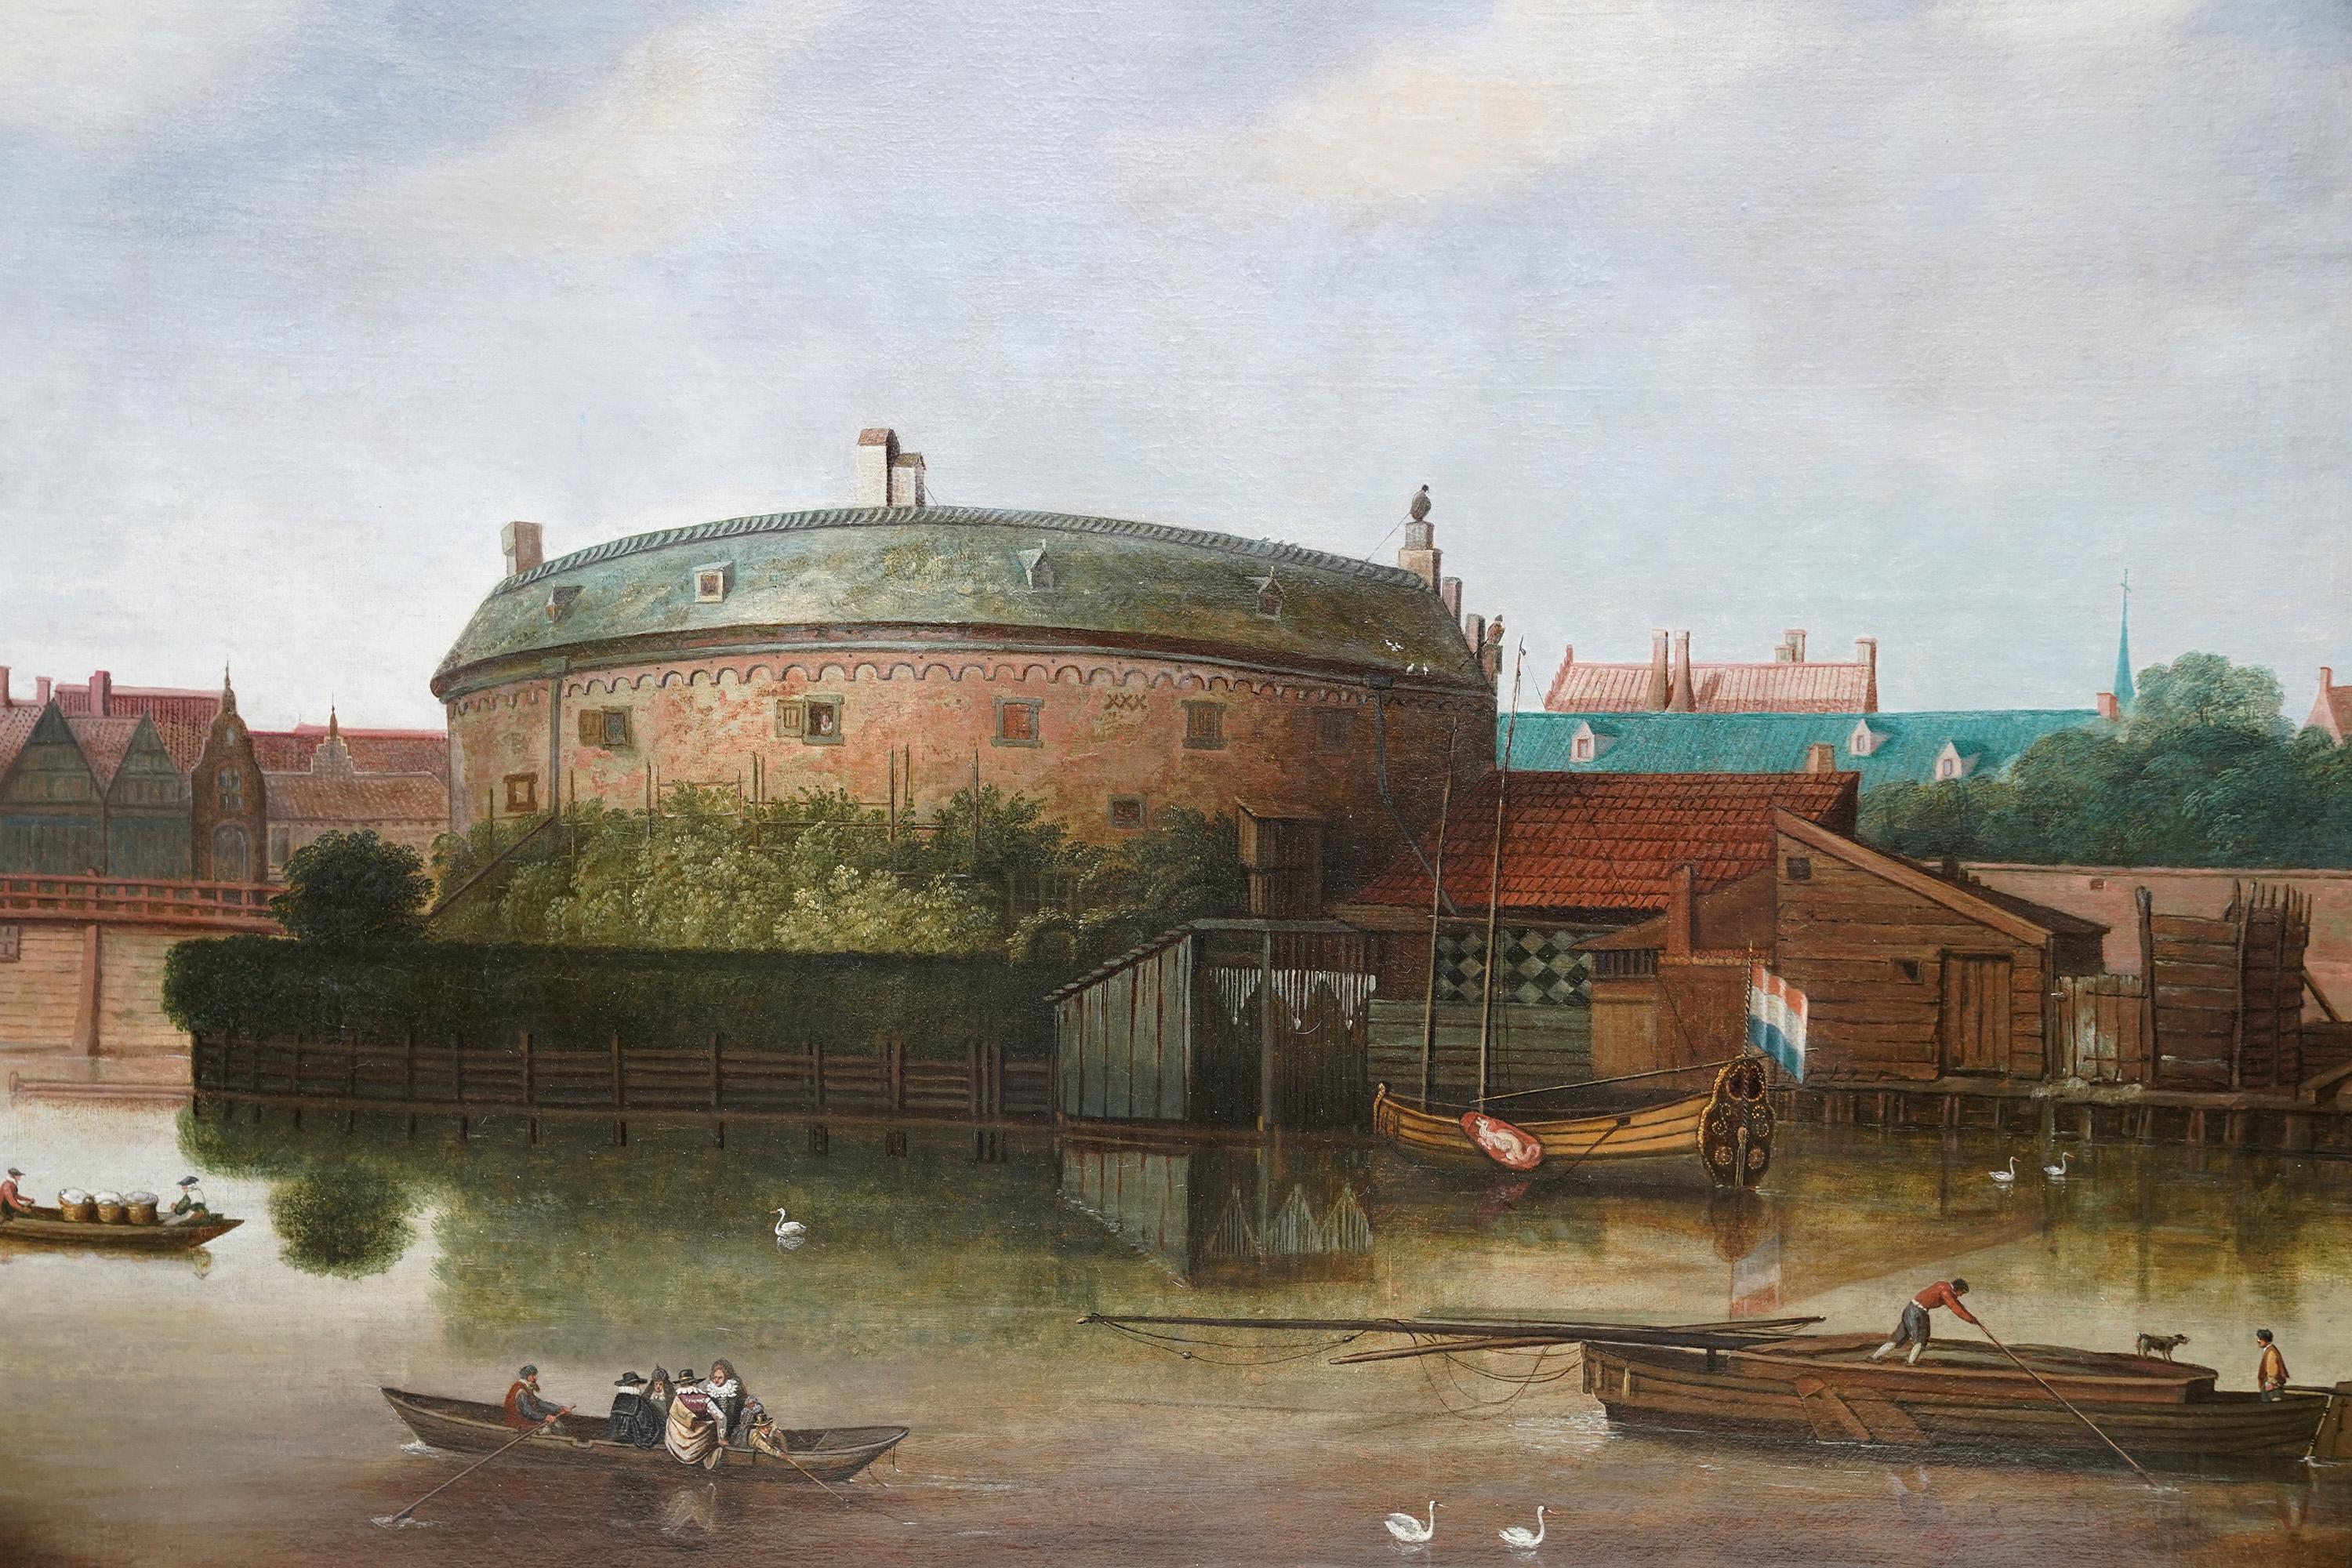 This very interesting 18th/19th century Dutch oil painting is attributed to circle or follower of Bernardo Bellotto who was renowned for painting elaborate representations of architectural vistas, such as this painting. There is an indistinct